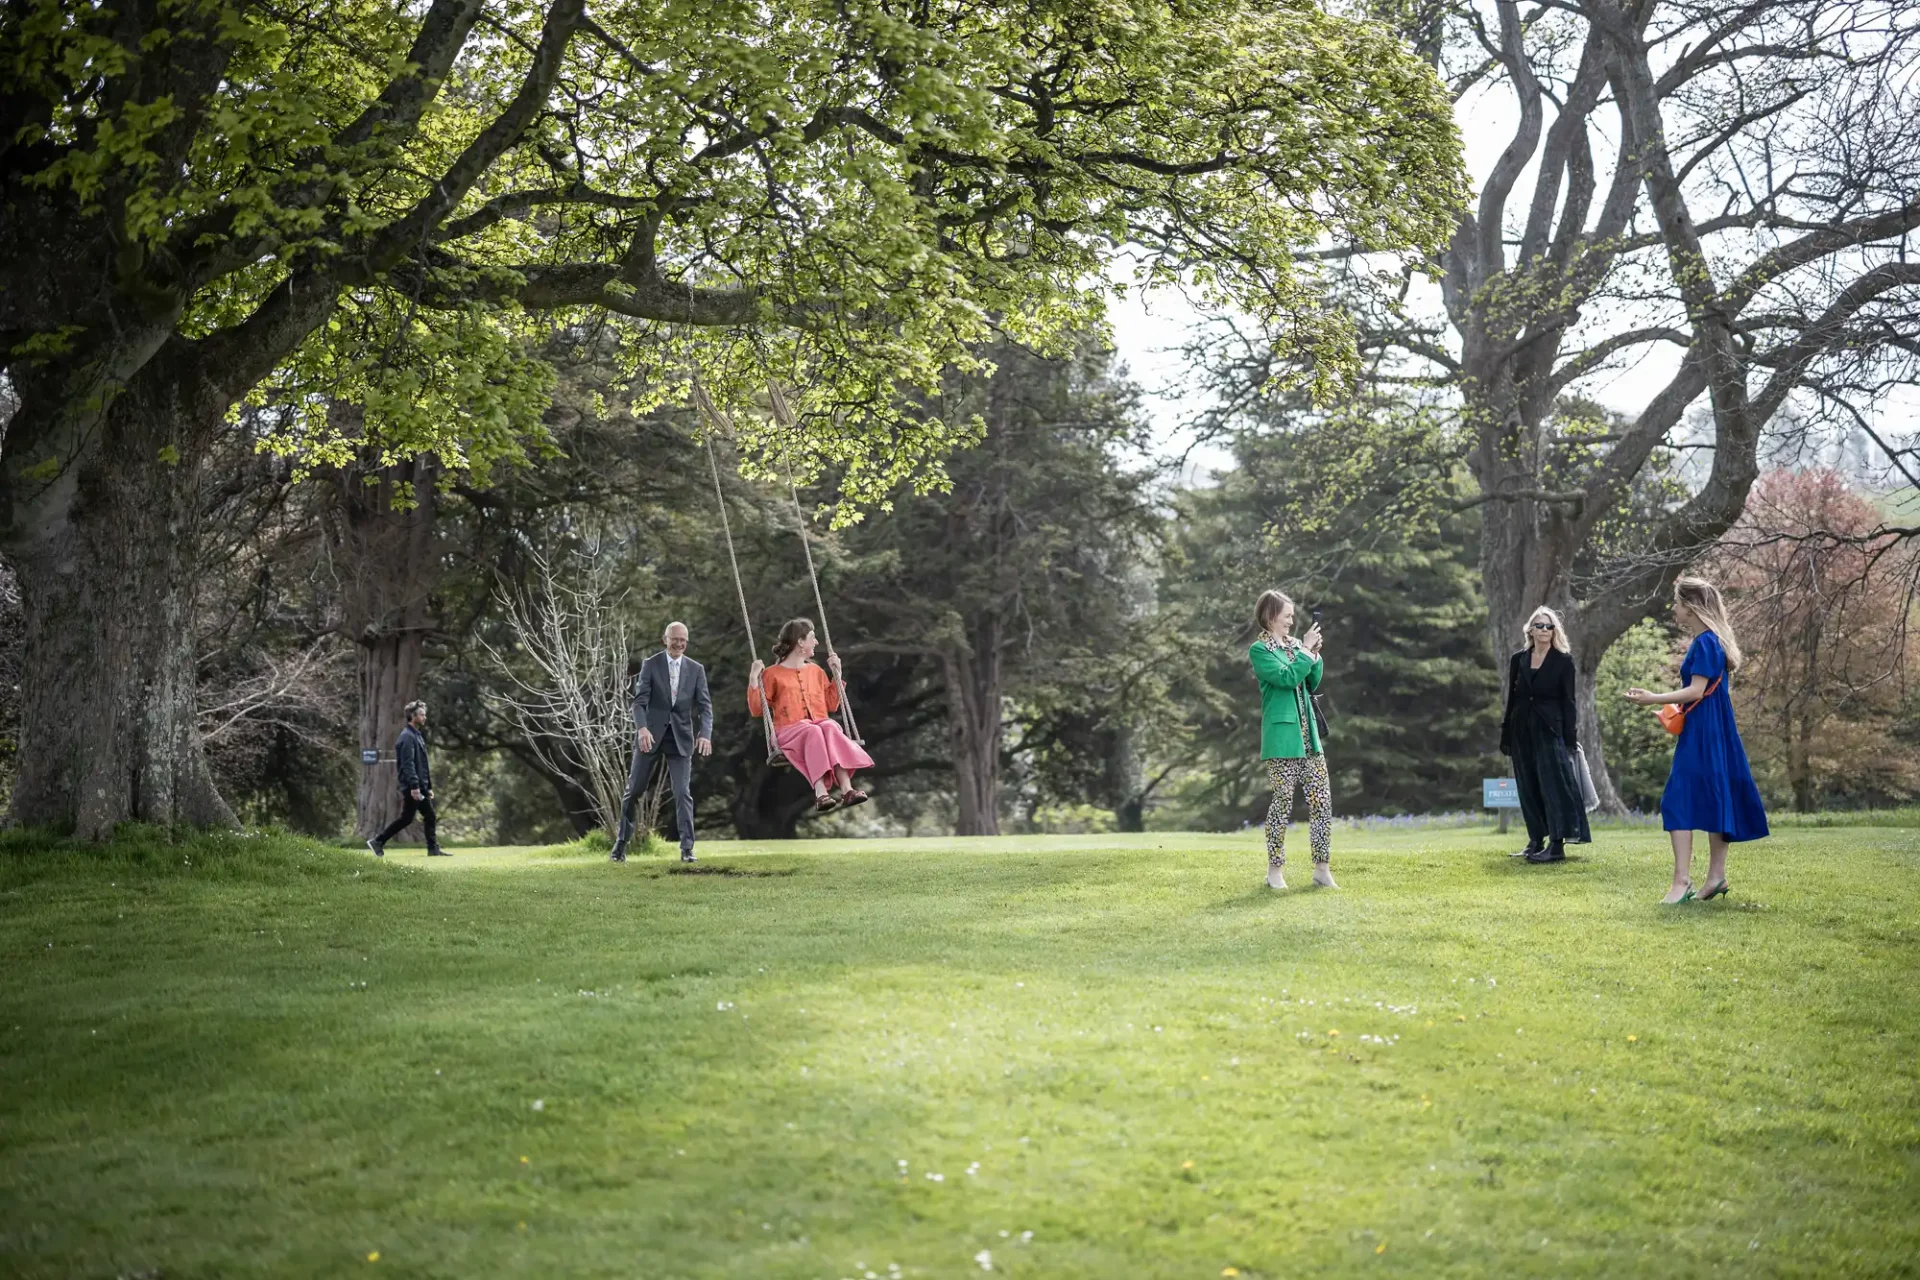 People walking and standing in a lush, open park surrounded by trees; one person is swinging on a tree swing, while another person is taking a photo.